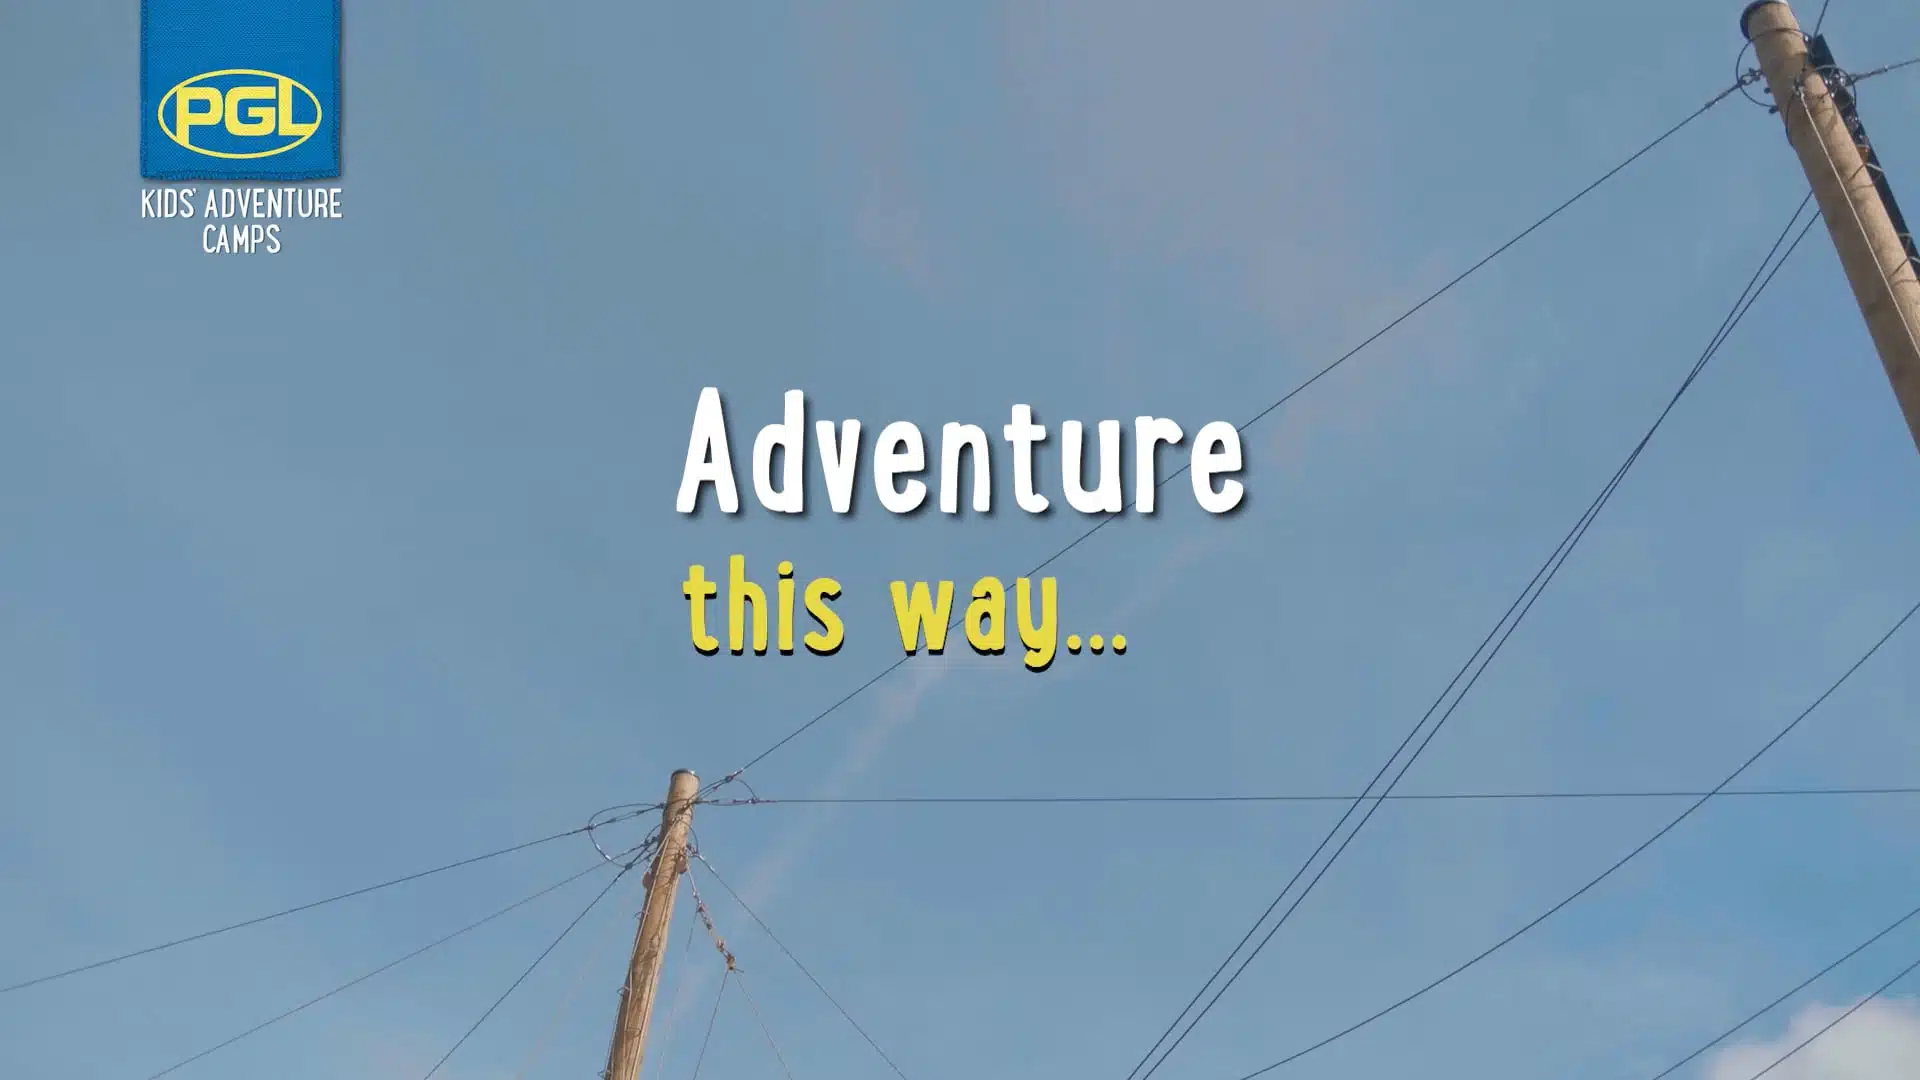 An advertisement for PGL Kids Adventure Camps. Text reads "Adventure this way..." against a blue sky